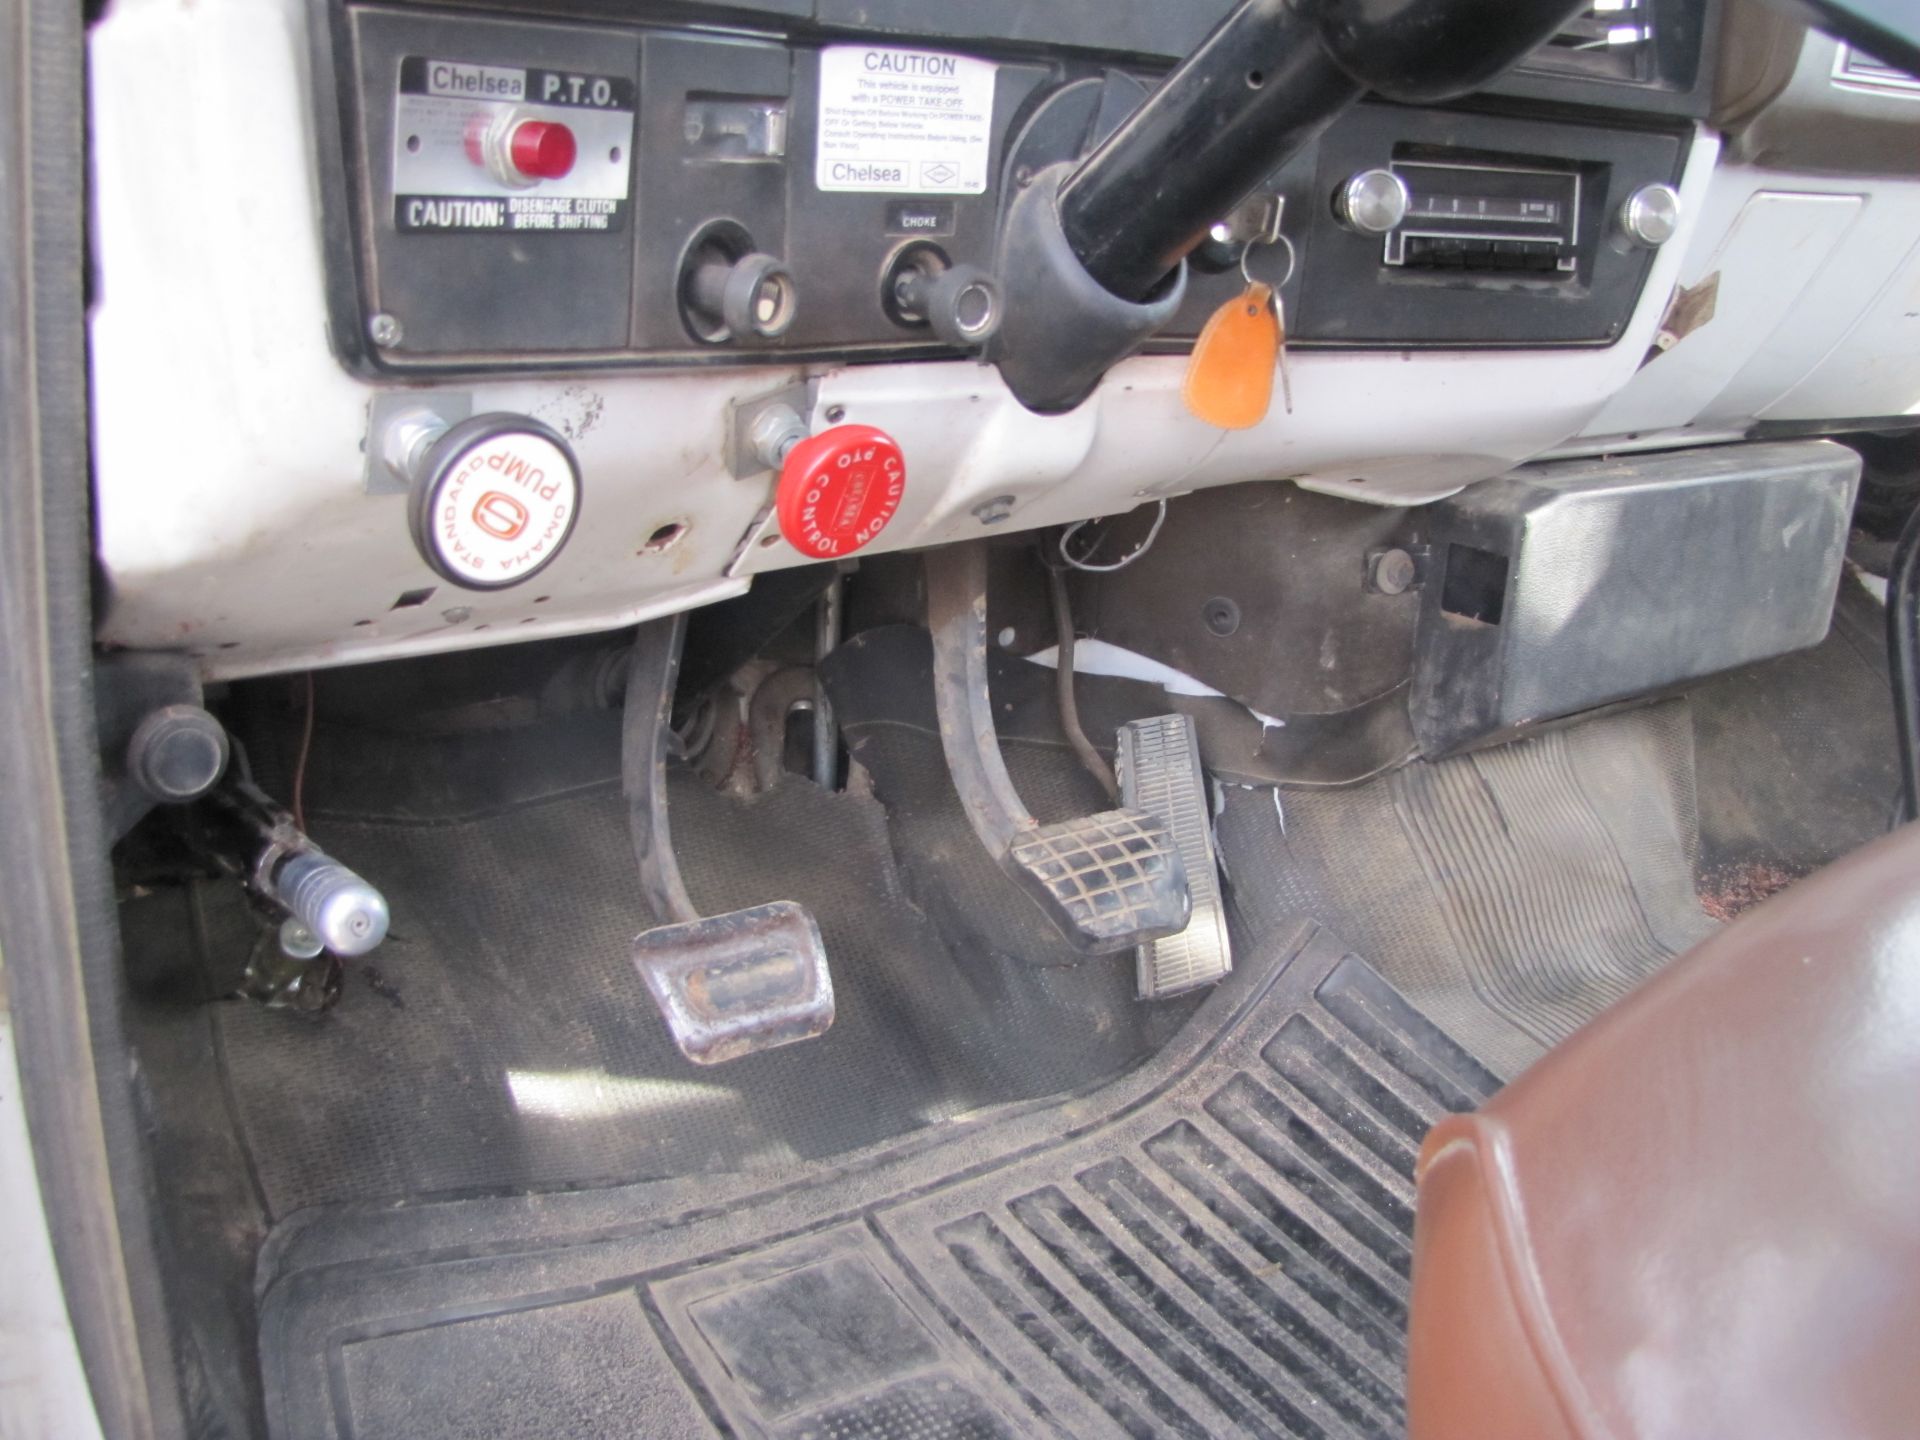 1983 Chevrolet C70 grain truck, 366 gas, 5+2 speed, single axle, 11R22.5 tires, shows 51,791 miles - Image 19 of 54